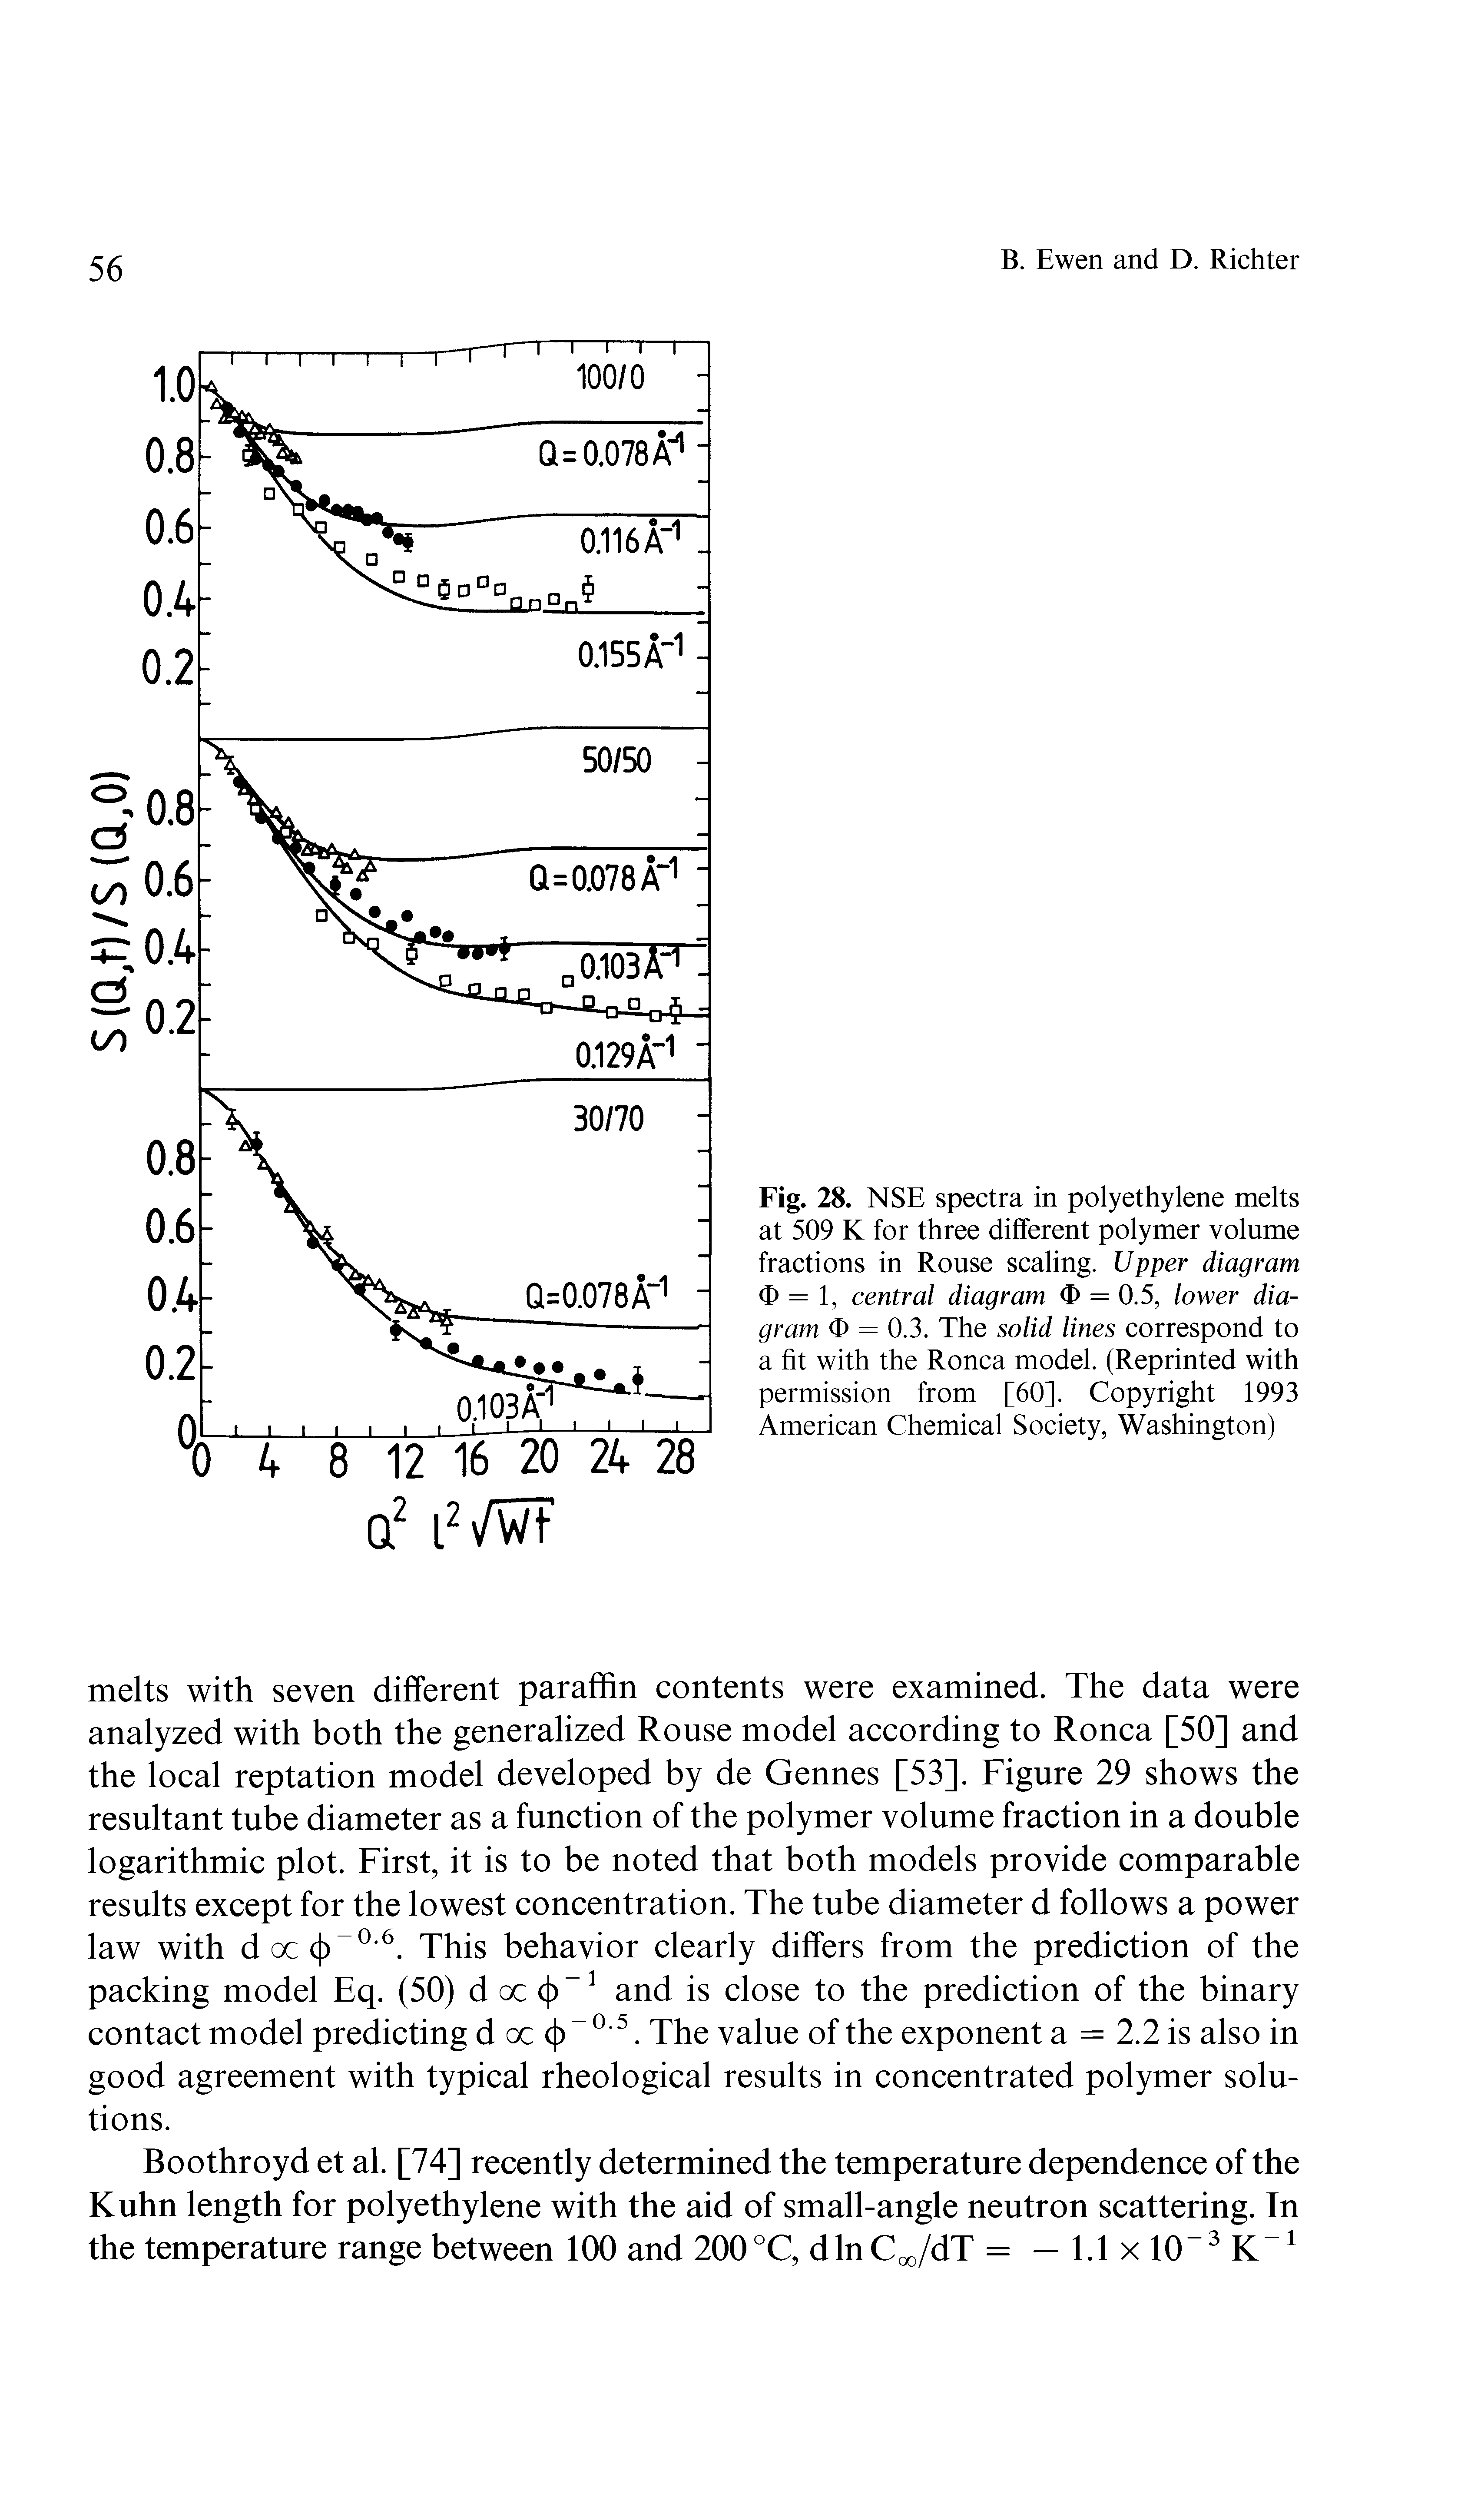 Fig. 28. NSE spectra in polyethylene melts at 509 K for three different polymer volume fractions in Rouse scaling. Upper diagram 0 = 1, central diagram O = 0.5, lower diagram O = 0.3. The solid lines correspond to a fit with the Ronca model. (Reprinted with permission from [60]. Copyright 1993 American Chemical Society, Washington)...